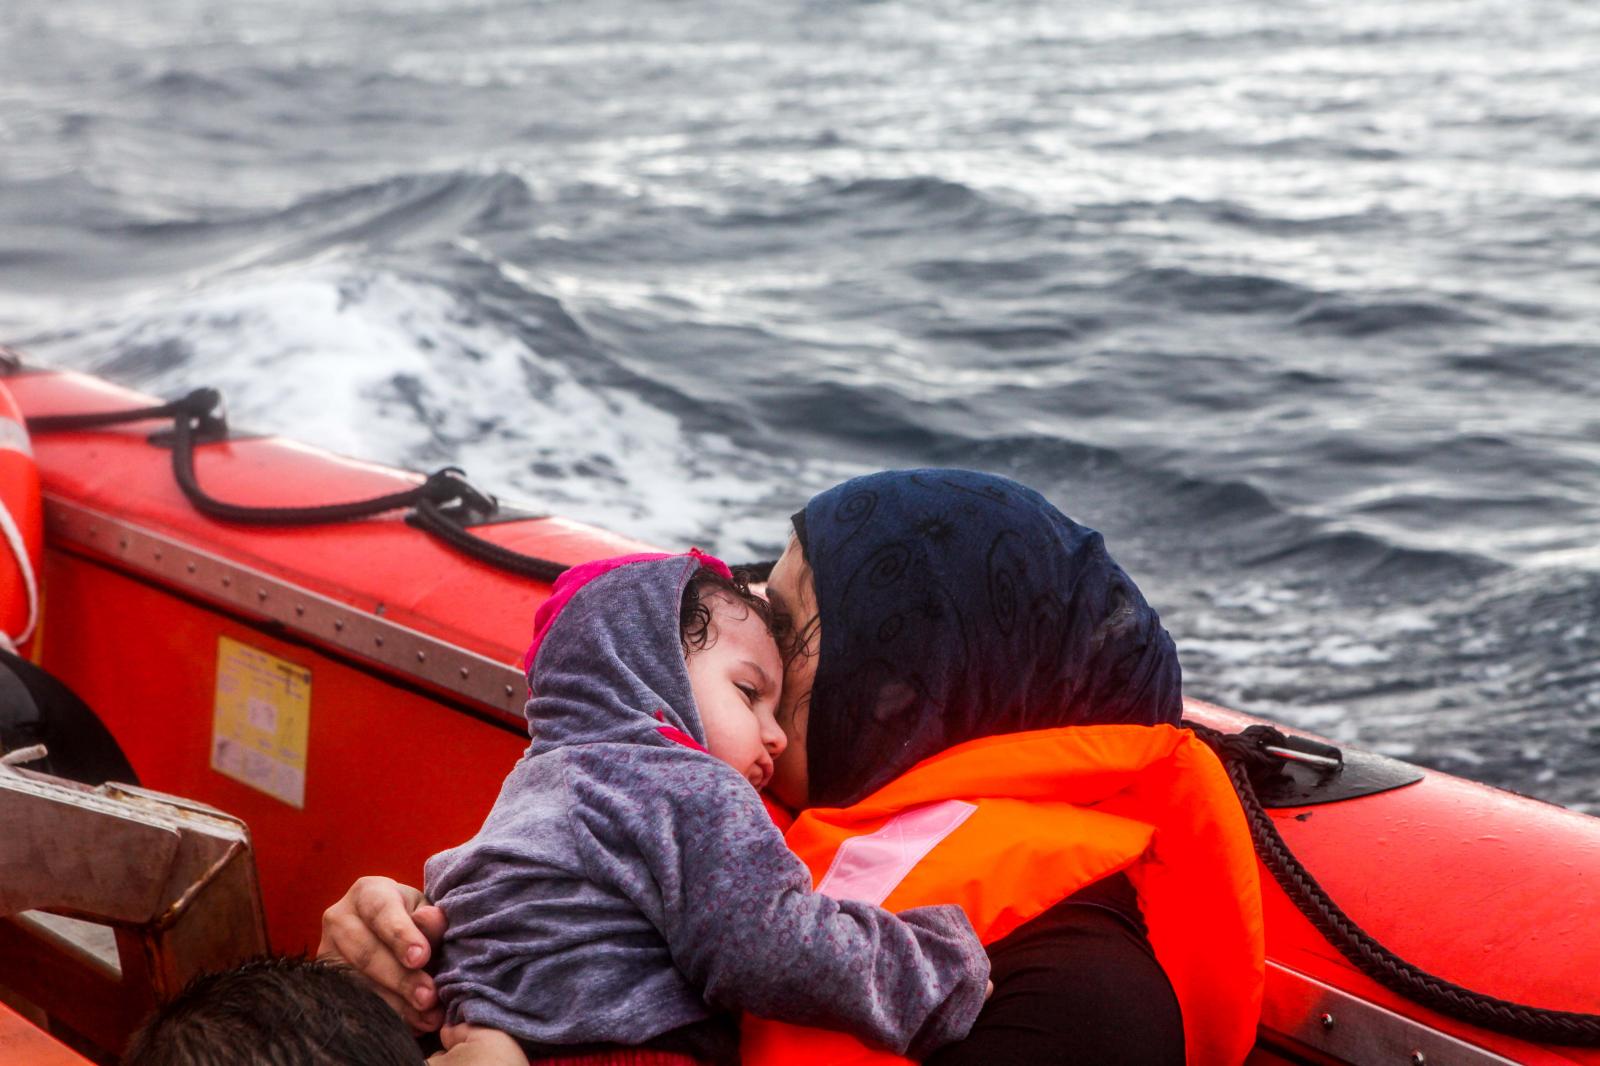 Refugees in the Aegean - 